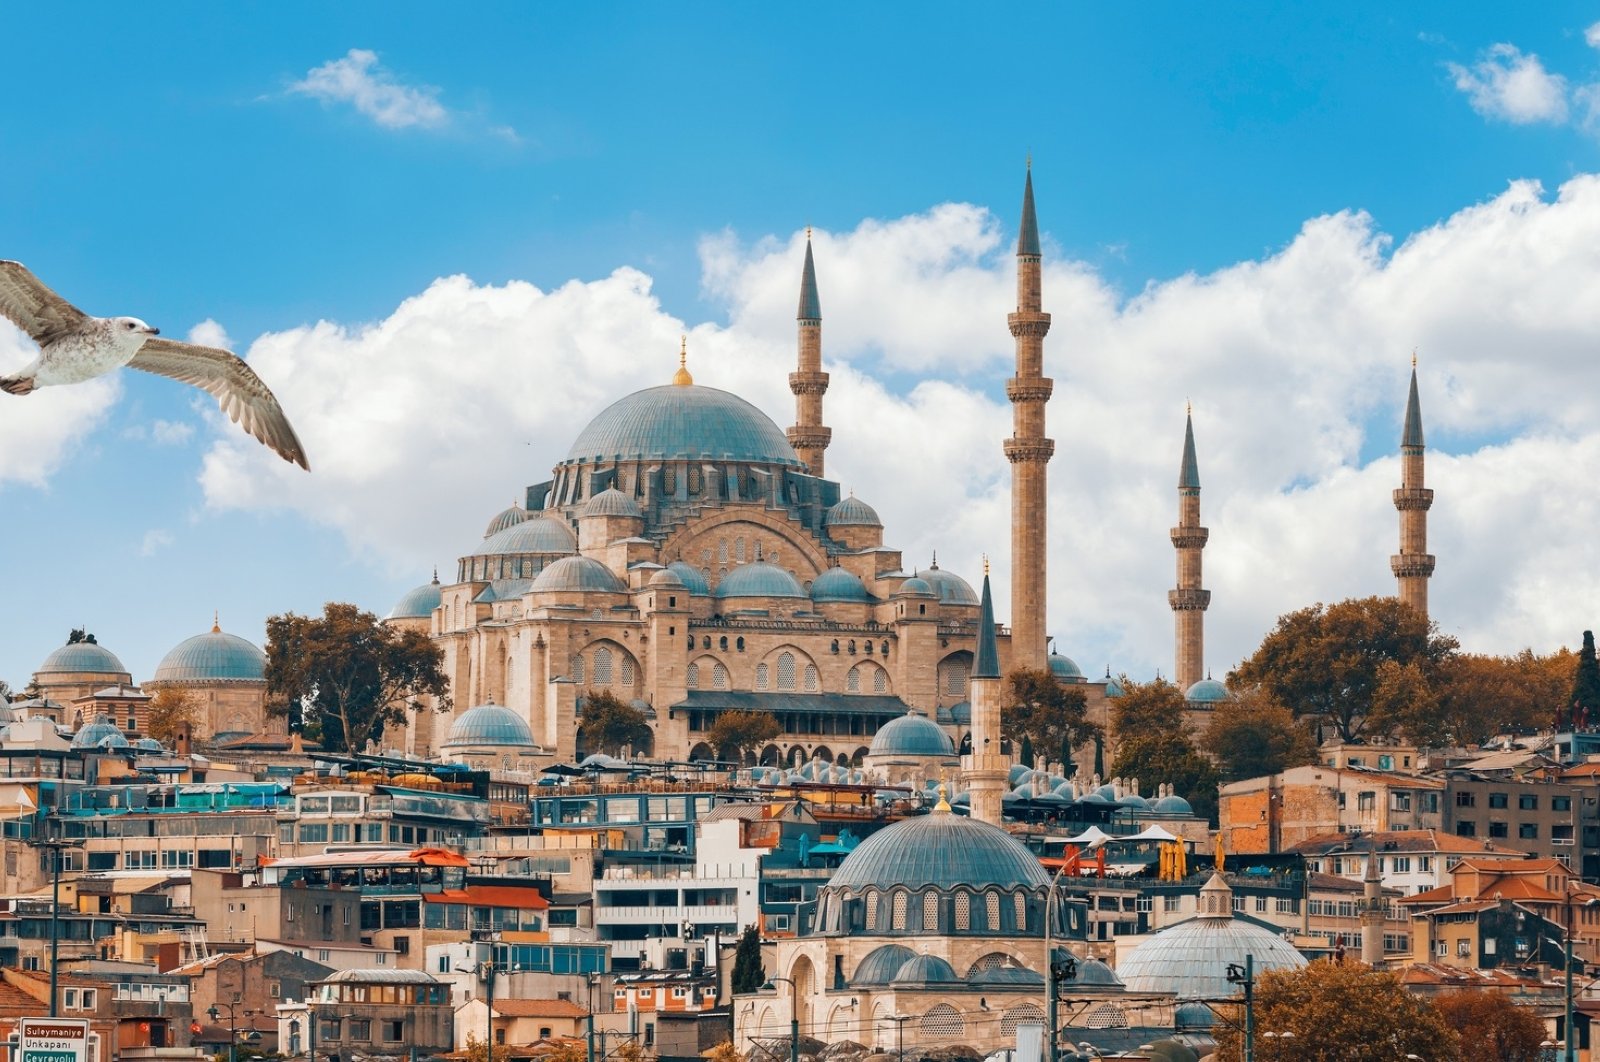 Four regions and structures in historical parts of Istanbul have been accepted to the UNESCO World Heritage List since 1985. (Shutterstock Photo)